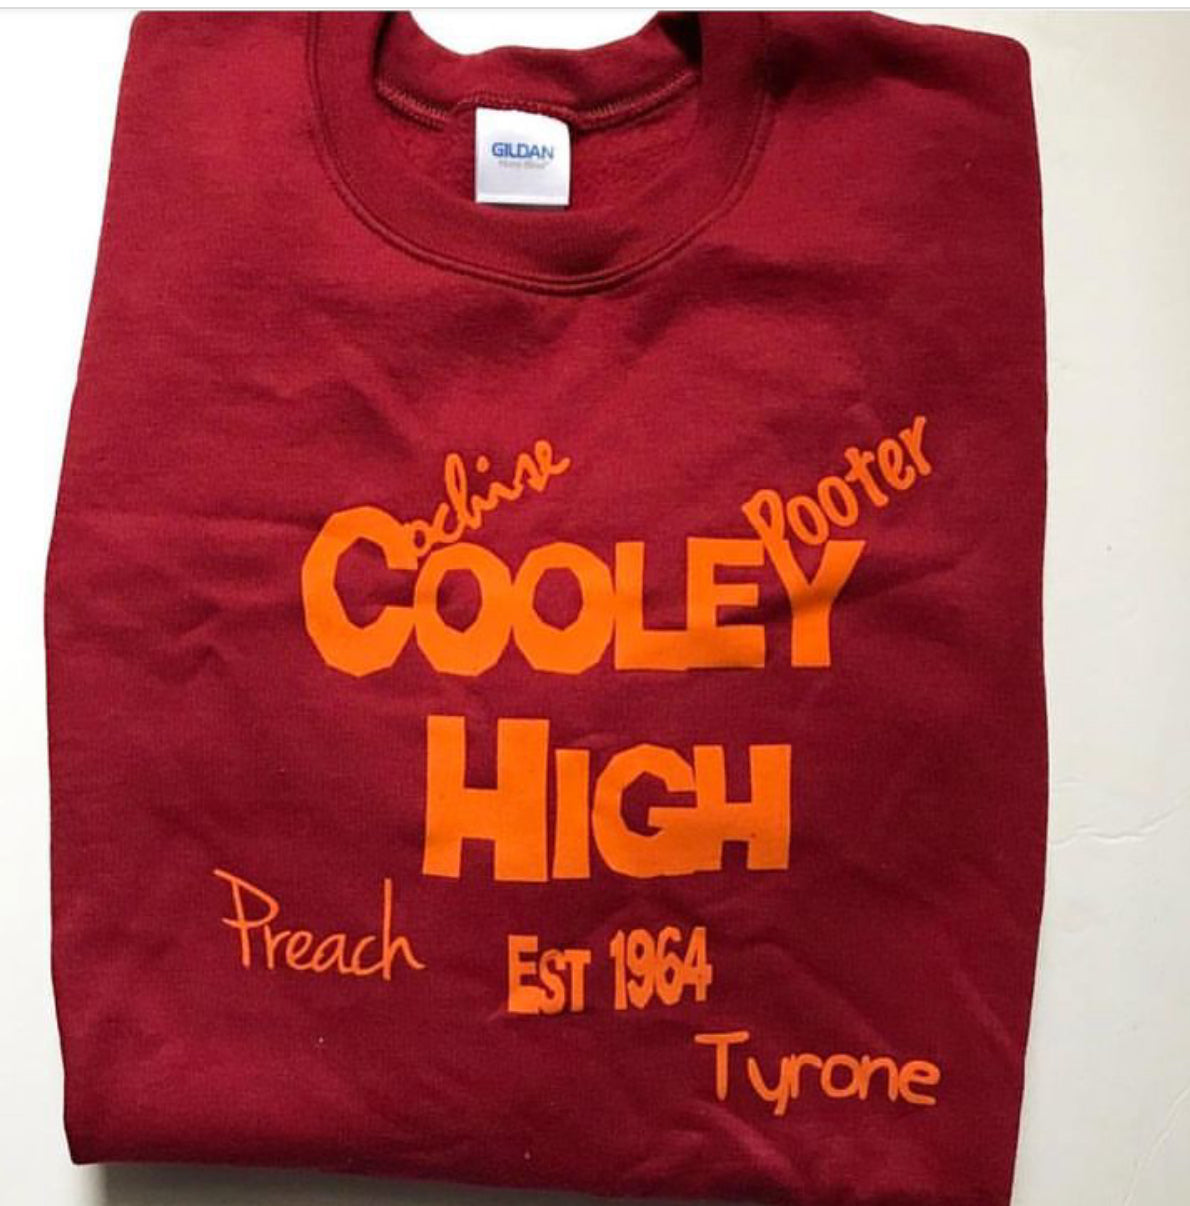 Cooley High Crew